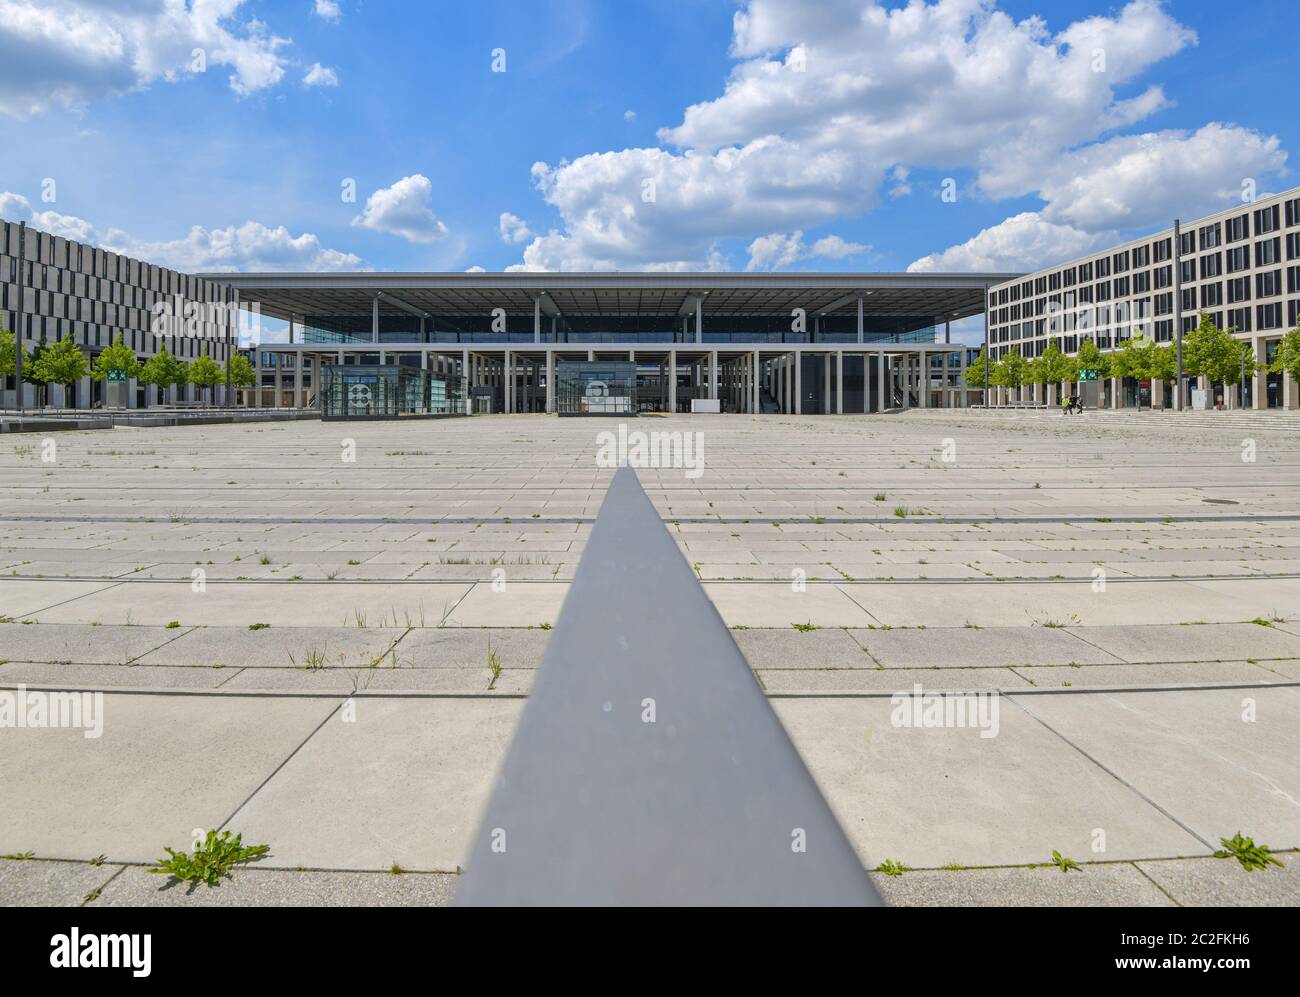 17 June 2020, Brandenburg, Schönefeld: The terminal of the capital airport Berlin Brandenburg Willy Brandt (BER). According to the operator, there are no more obstacles to the planned opening of the new Capital Airport BER in October 2020. After years of delays, BER is scheduled to start operations at the end of October 2020. The operating company is owned by the states of Berlin and Brandenburg and the federal government. Photo: Patrick Pleul/dpa-Zentralbild/ZB Stock Photo